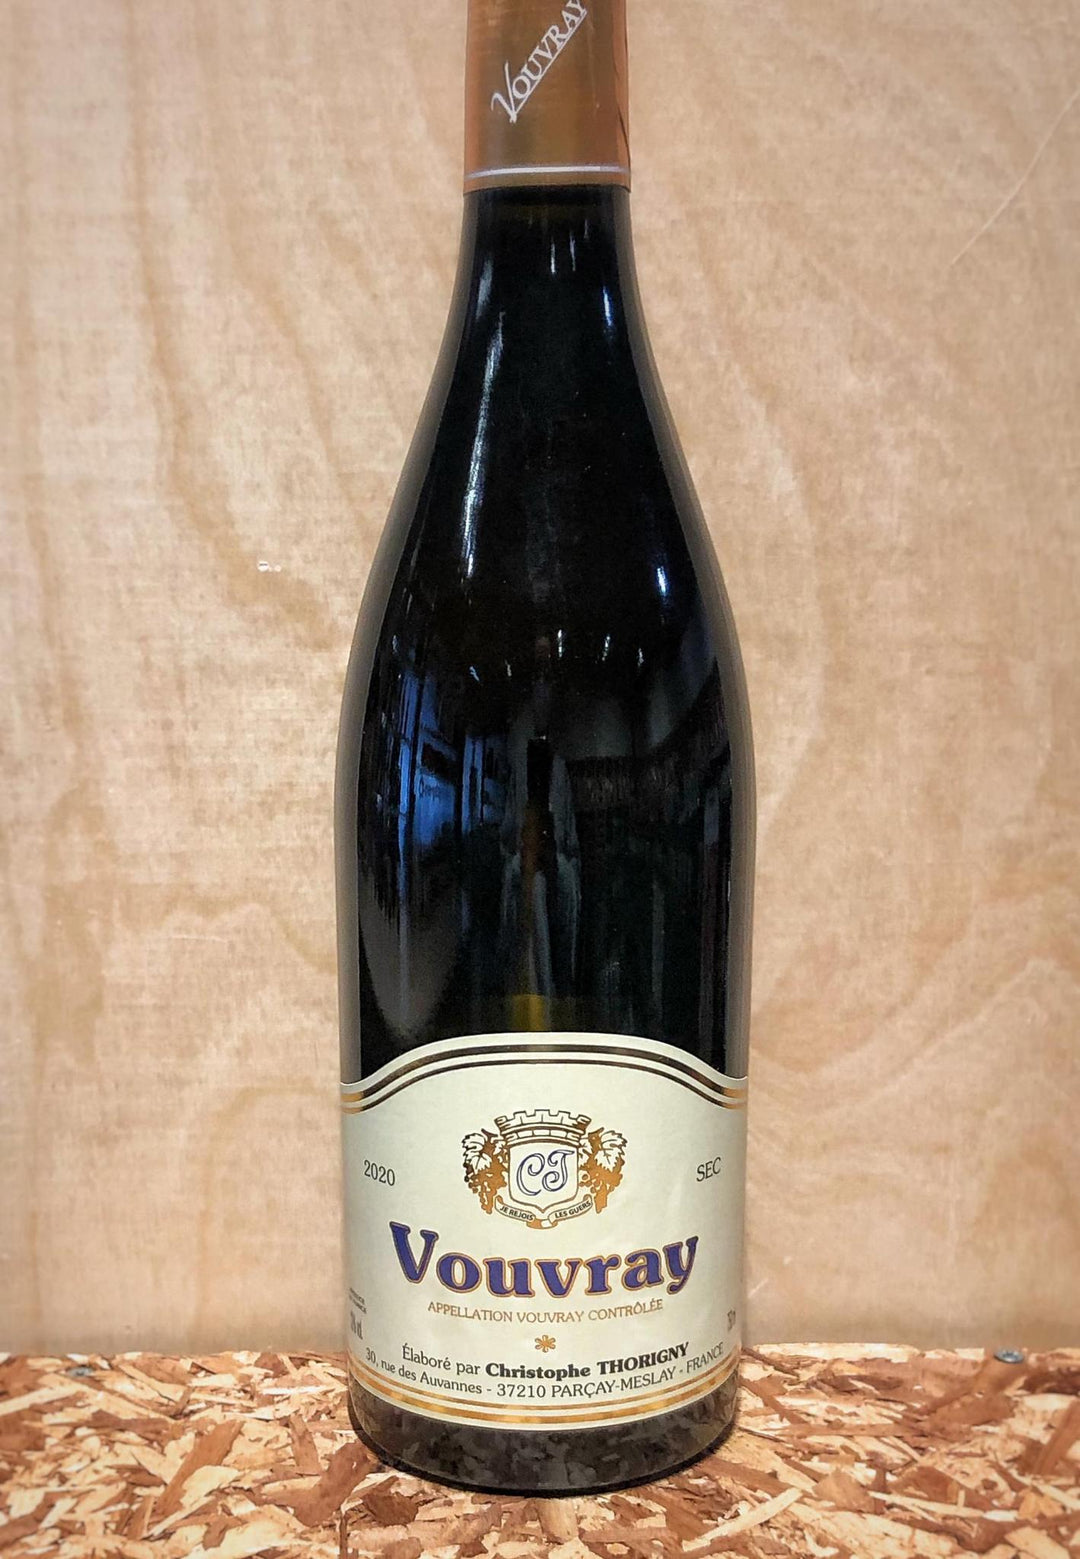 Domaine Thorigny Vouvray Sec 2021 (Loire Valley, France)